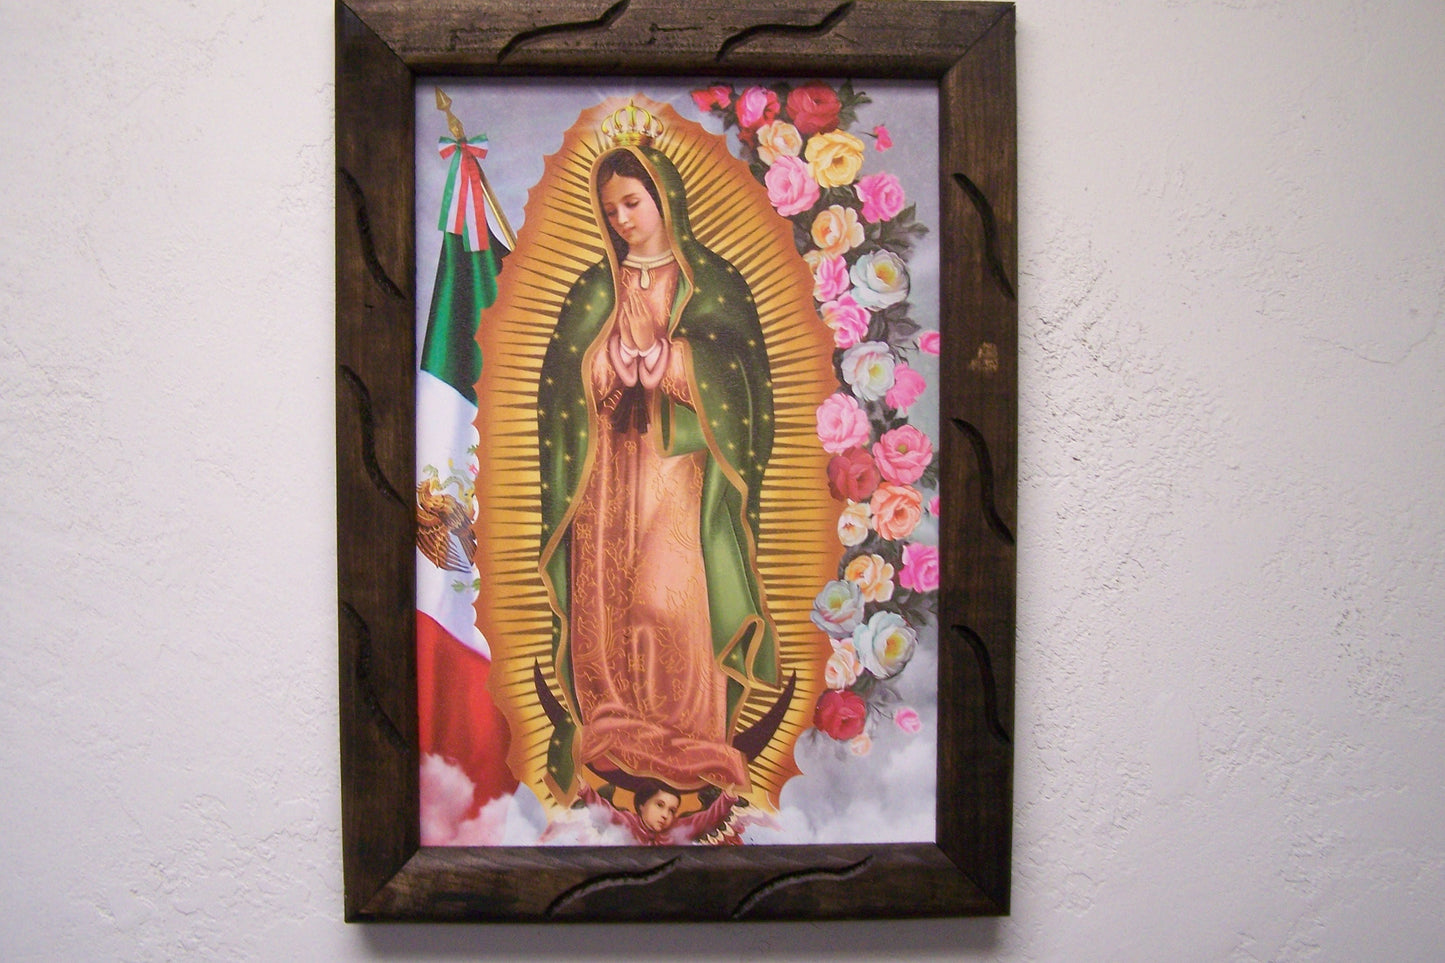 Framed Giclee Print - Virgin of Guadalupe with Mexican Flag and Roses - Mexico